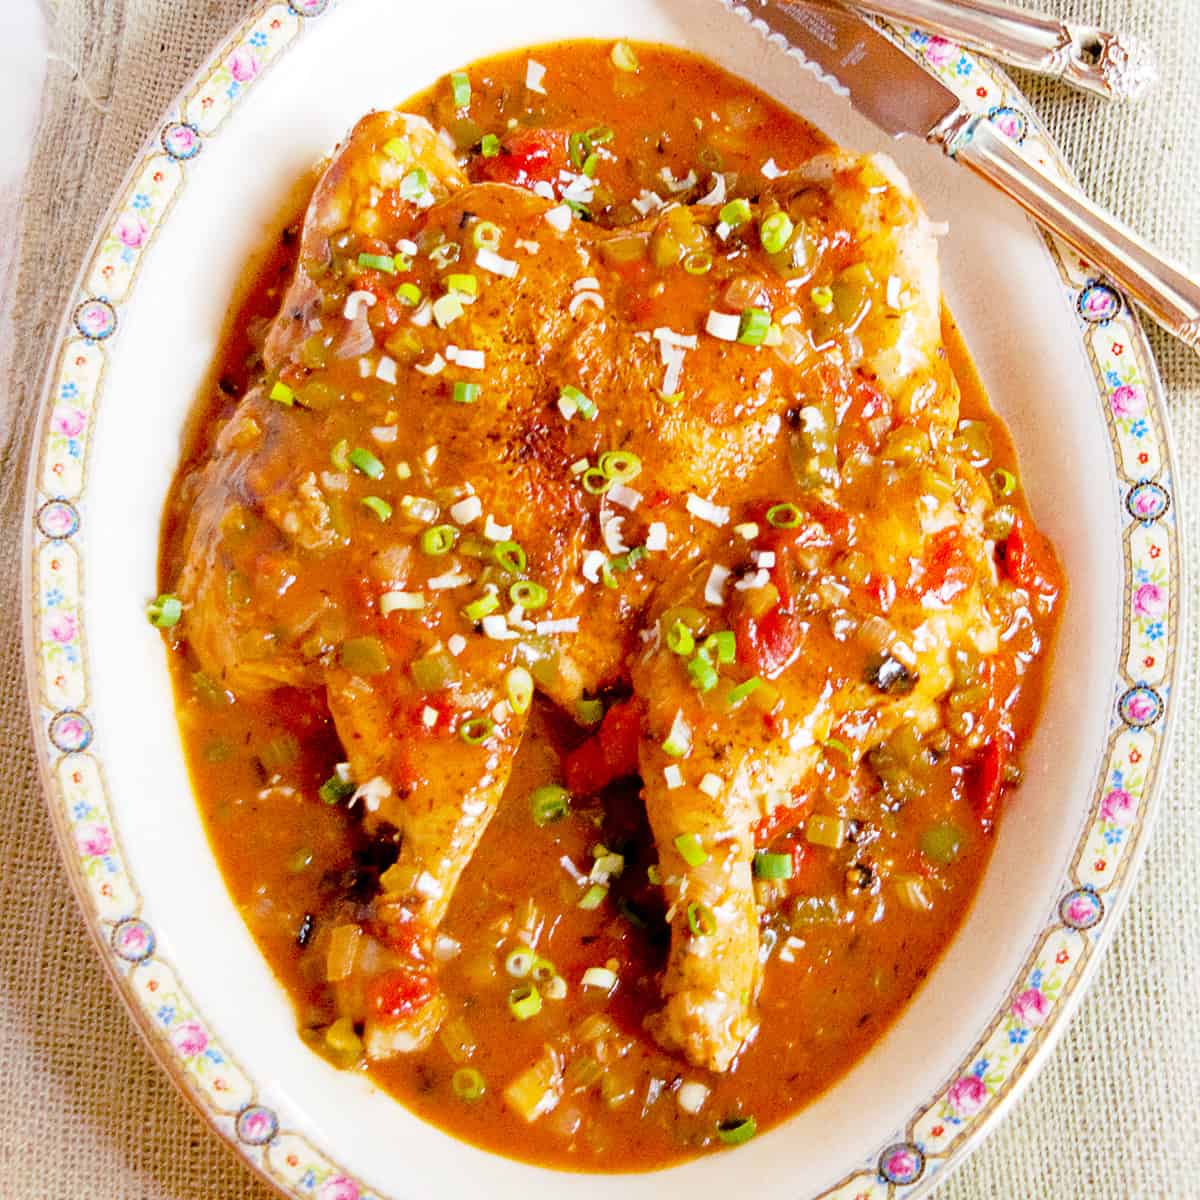 Creole Style Smothered Chicken presented on a large serving platter.